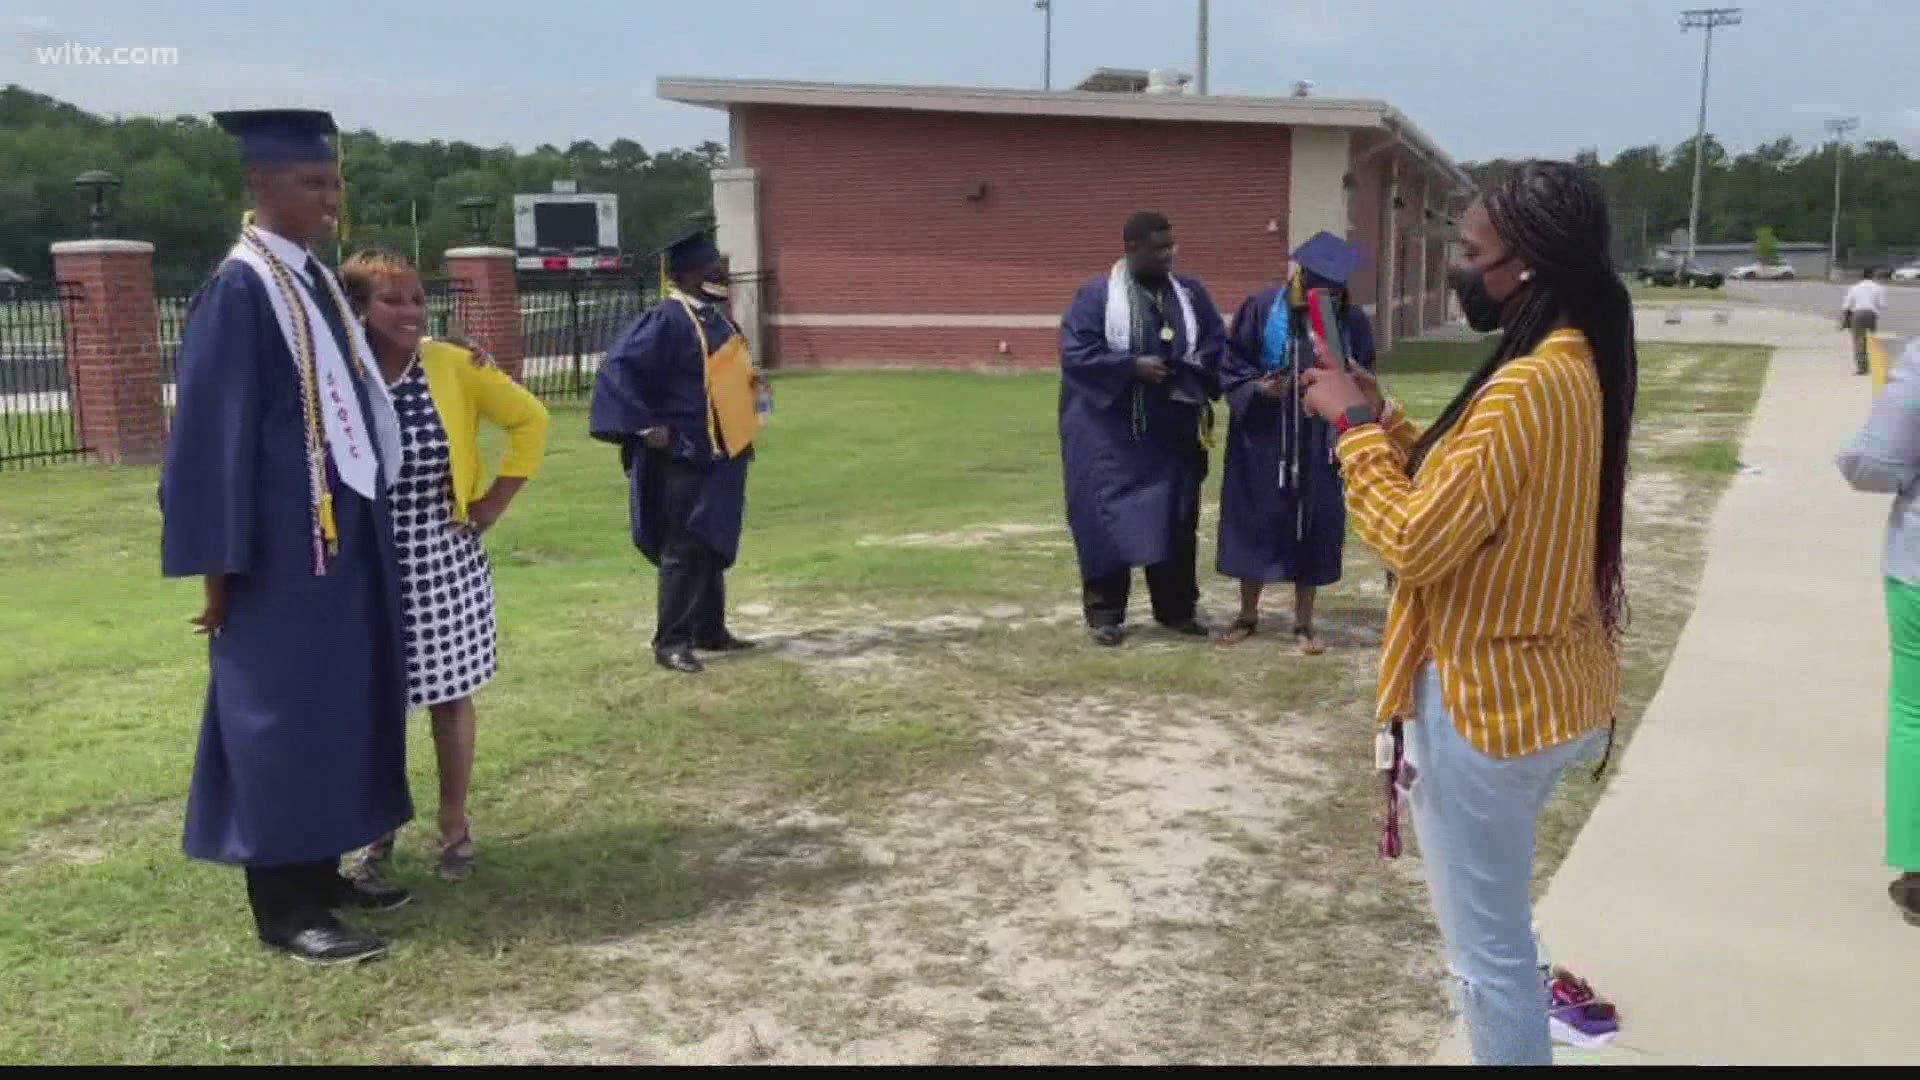 While seniors experienced their final years of high school a different way than most, they're excited to finally walk across the stage as graduates.